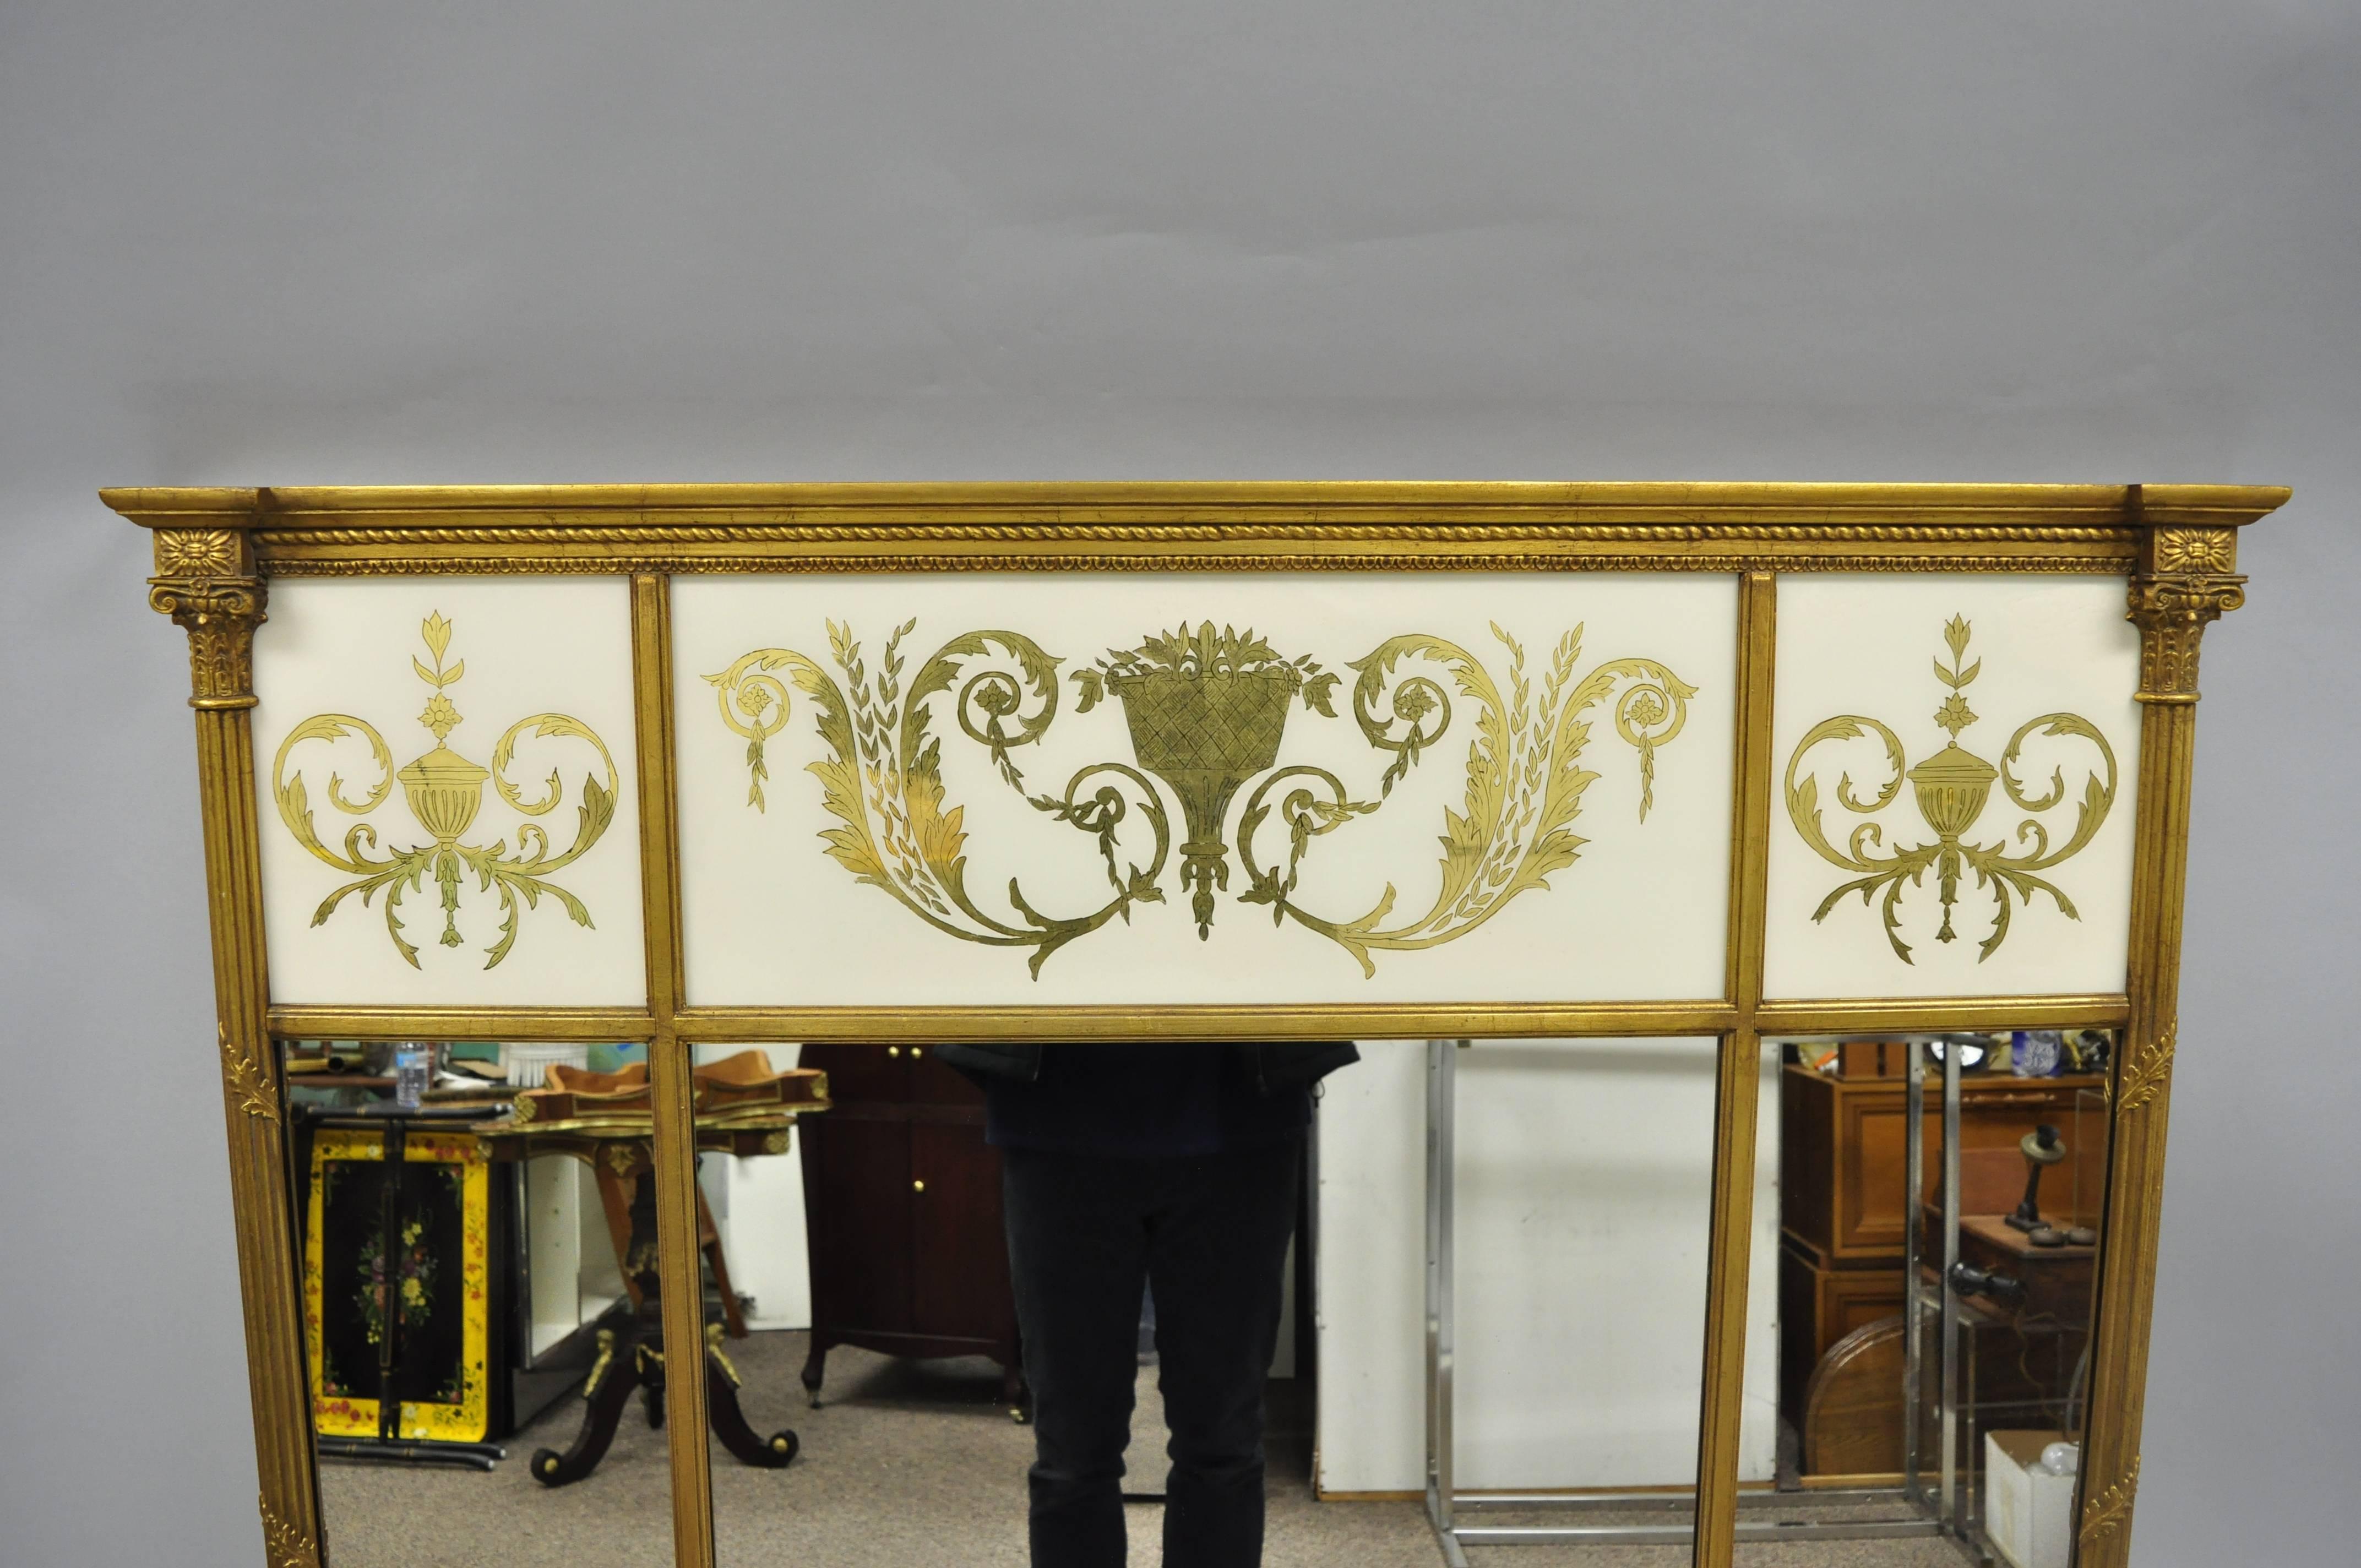 Large French neoclassical style gold gilt reverse painted Italian trumeau wall mirror. Item features a three section wooden frame, reverse painted glass pediment with urn, drape, and floral scroll work, and large impressive form, circa mid-20th